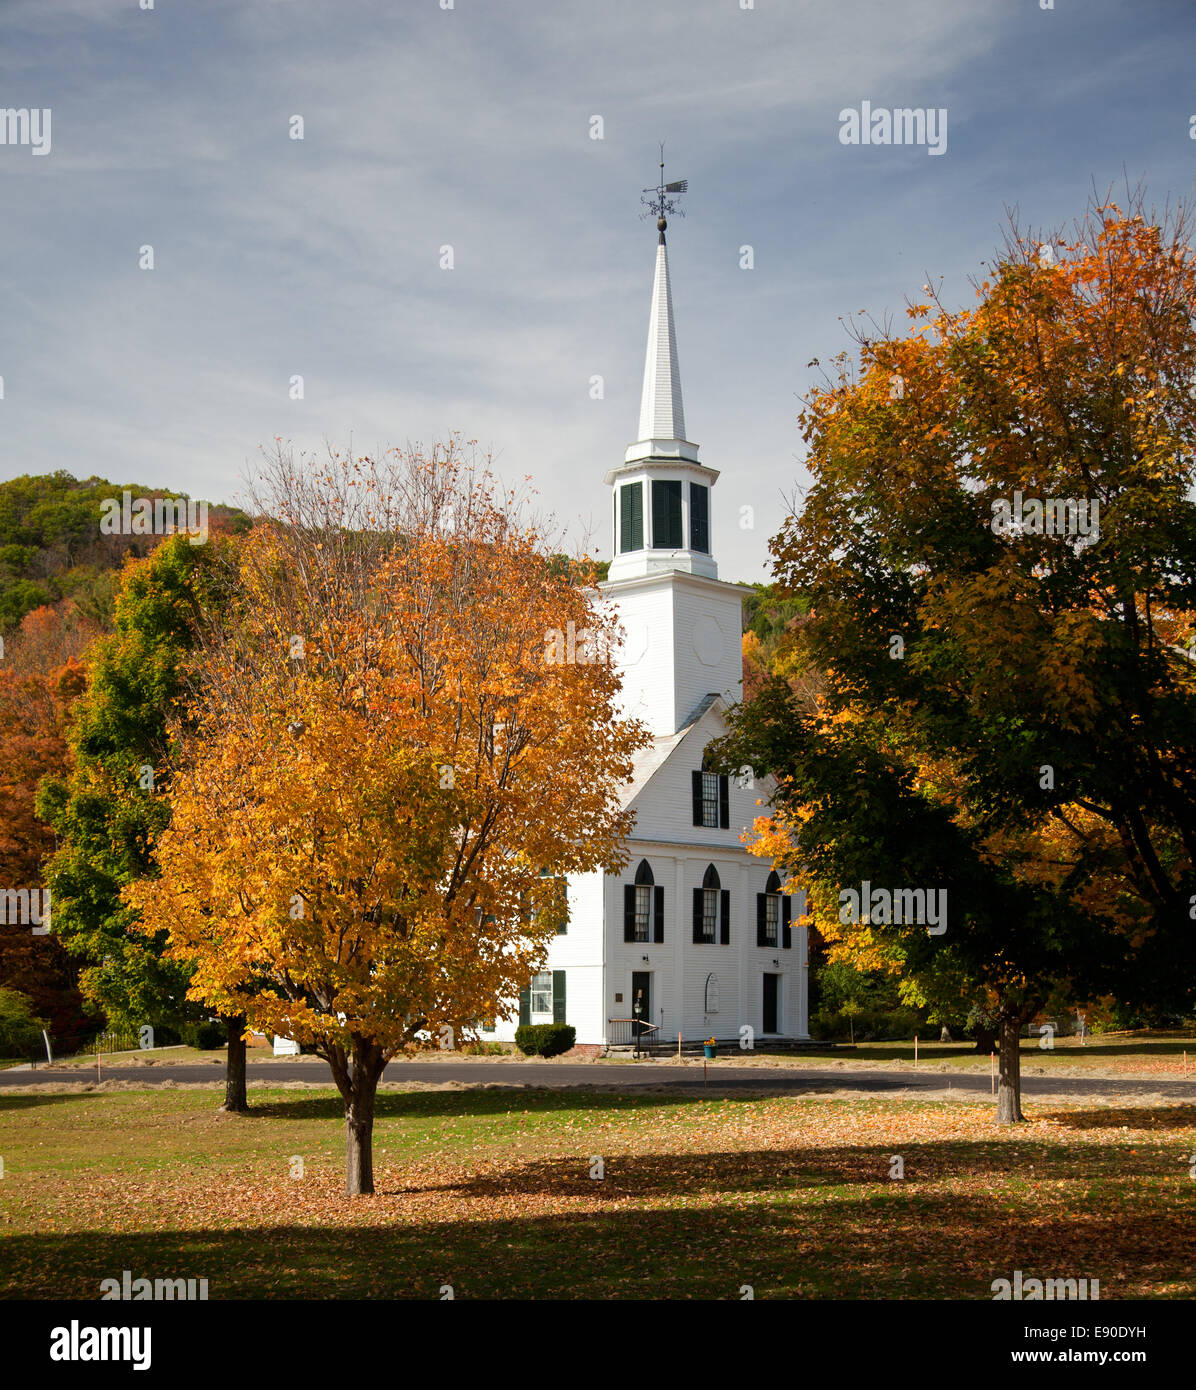 Townshend chiesa in autunno Foto Stock